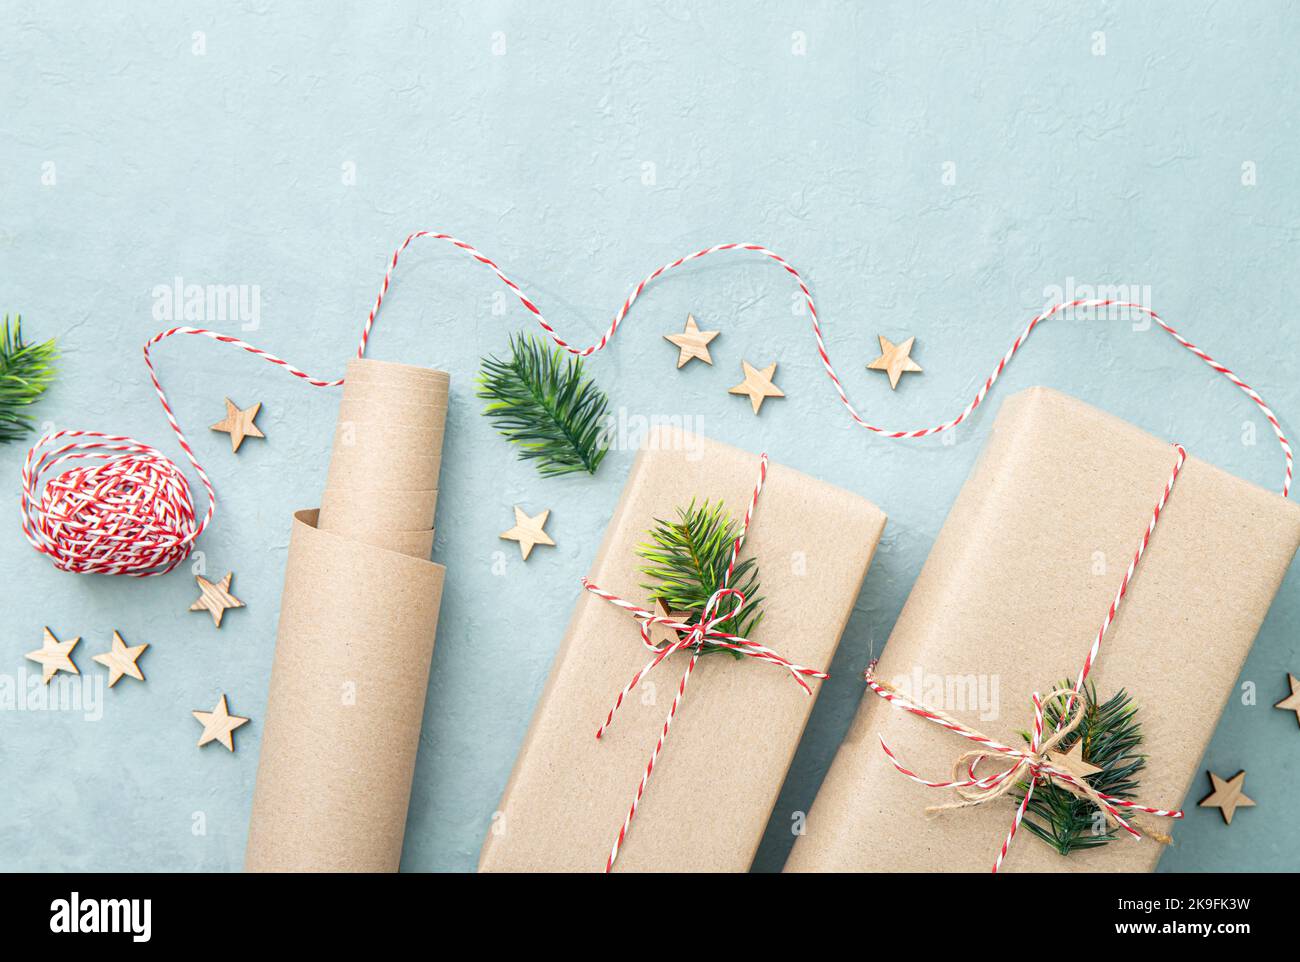 Gift wrapping with natural brown packing paper called Sack kraft paper or sack paper. Gifts decorated with red and white paper string. Stock Photo